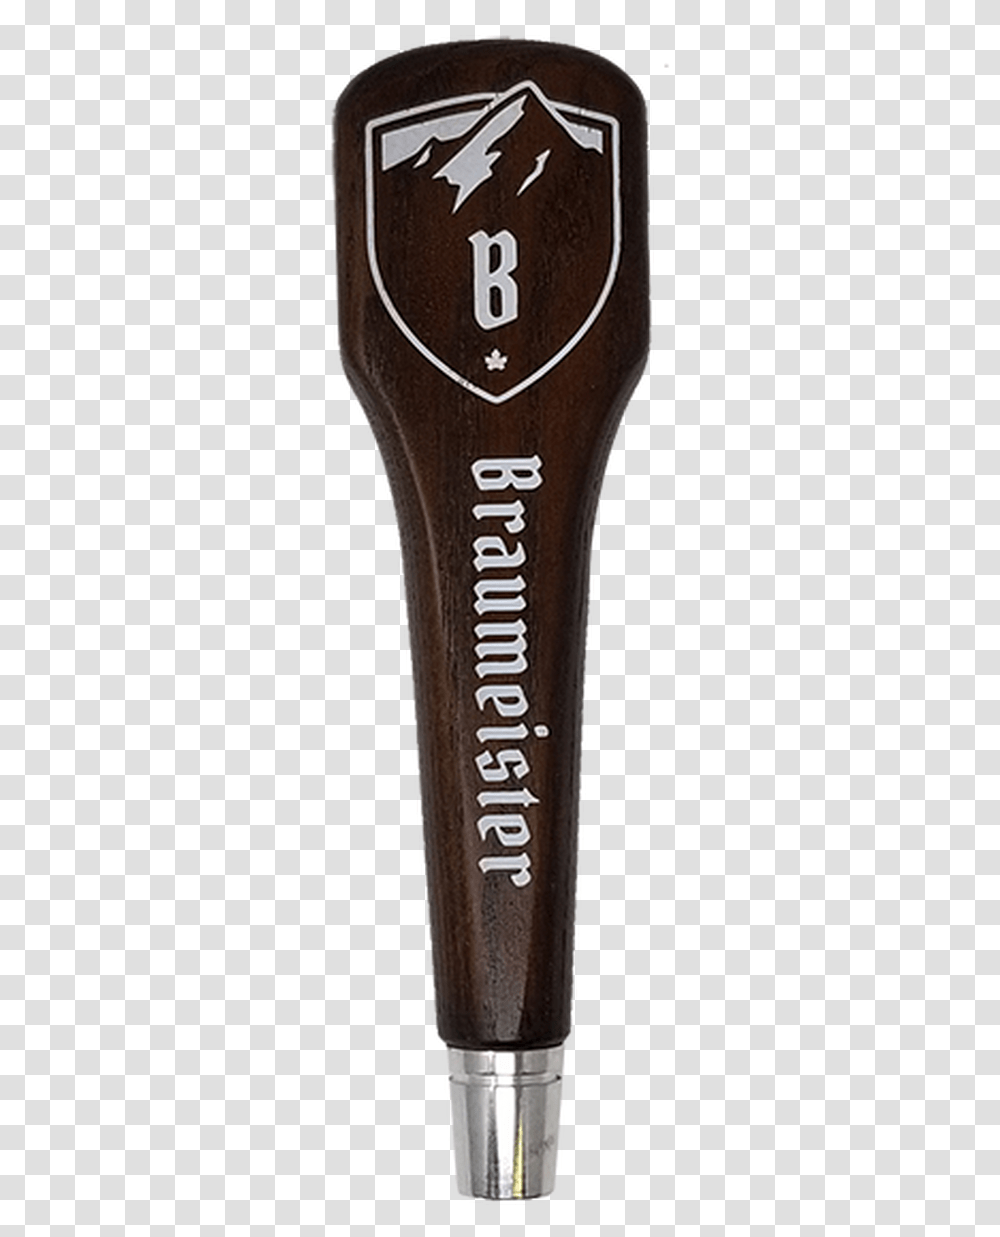 Braumeister Tap Handle Marking Tools, Stick, Quiver, Cane Transparent Png